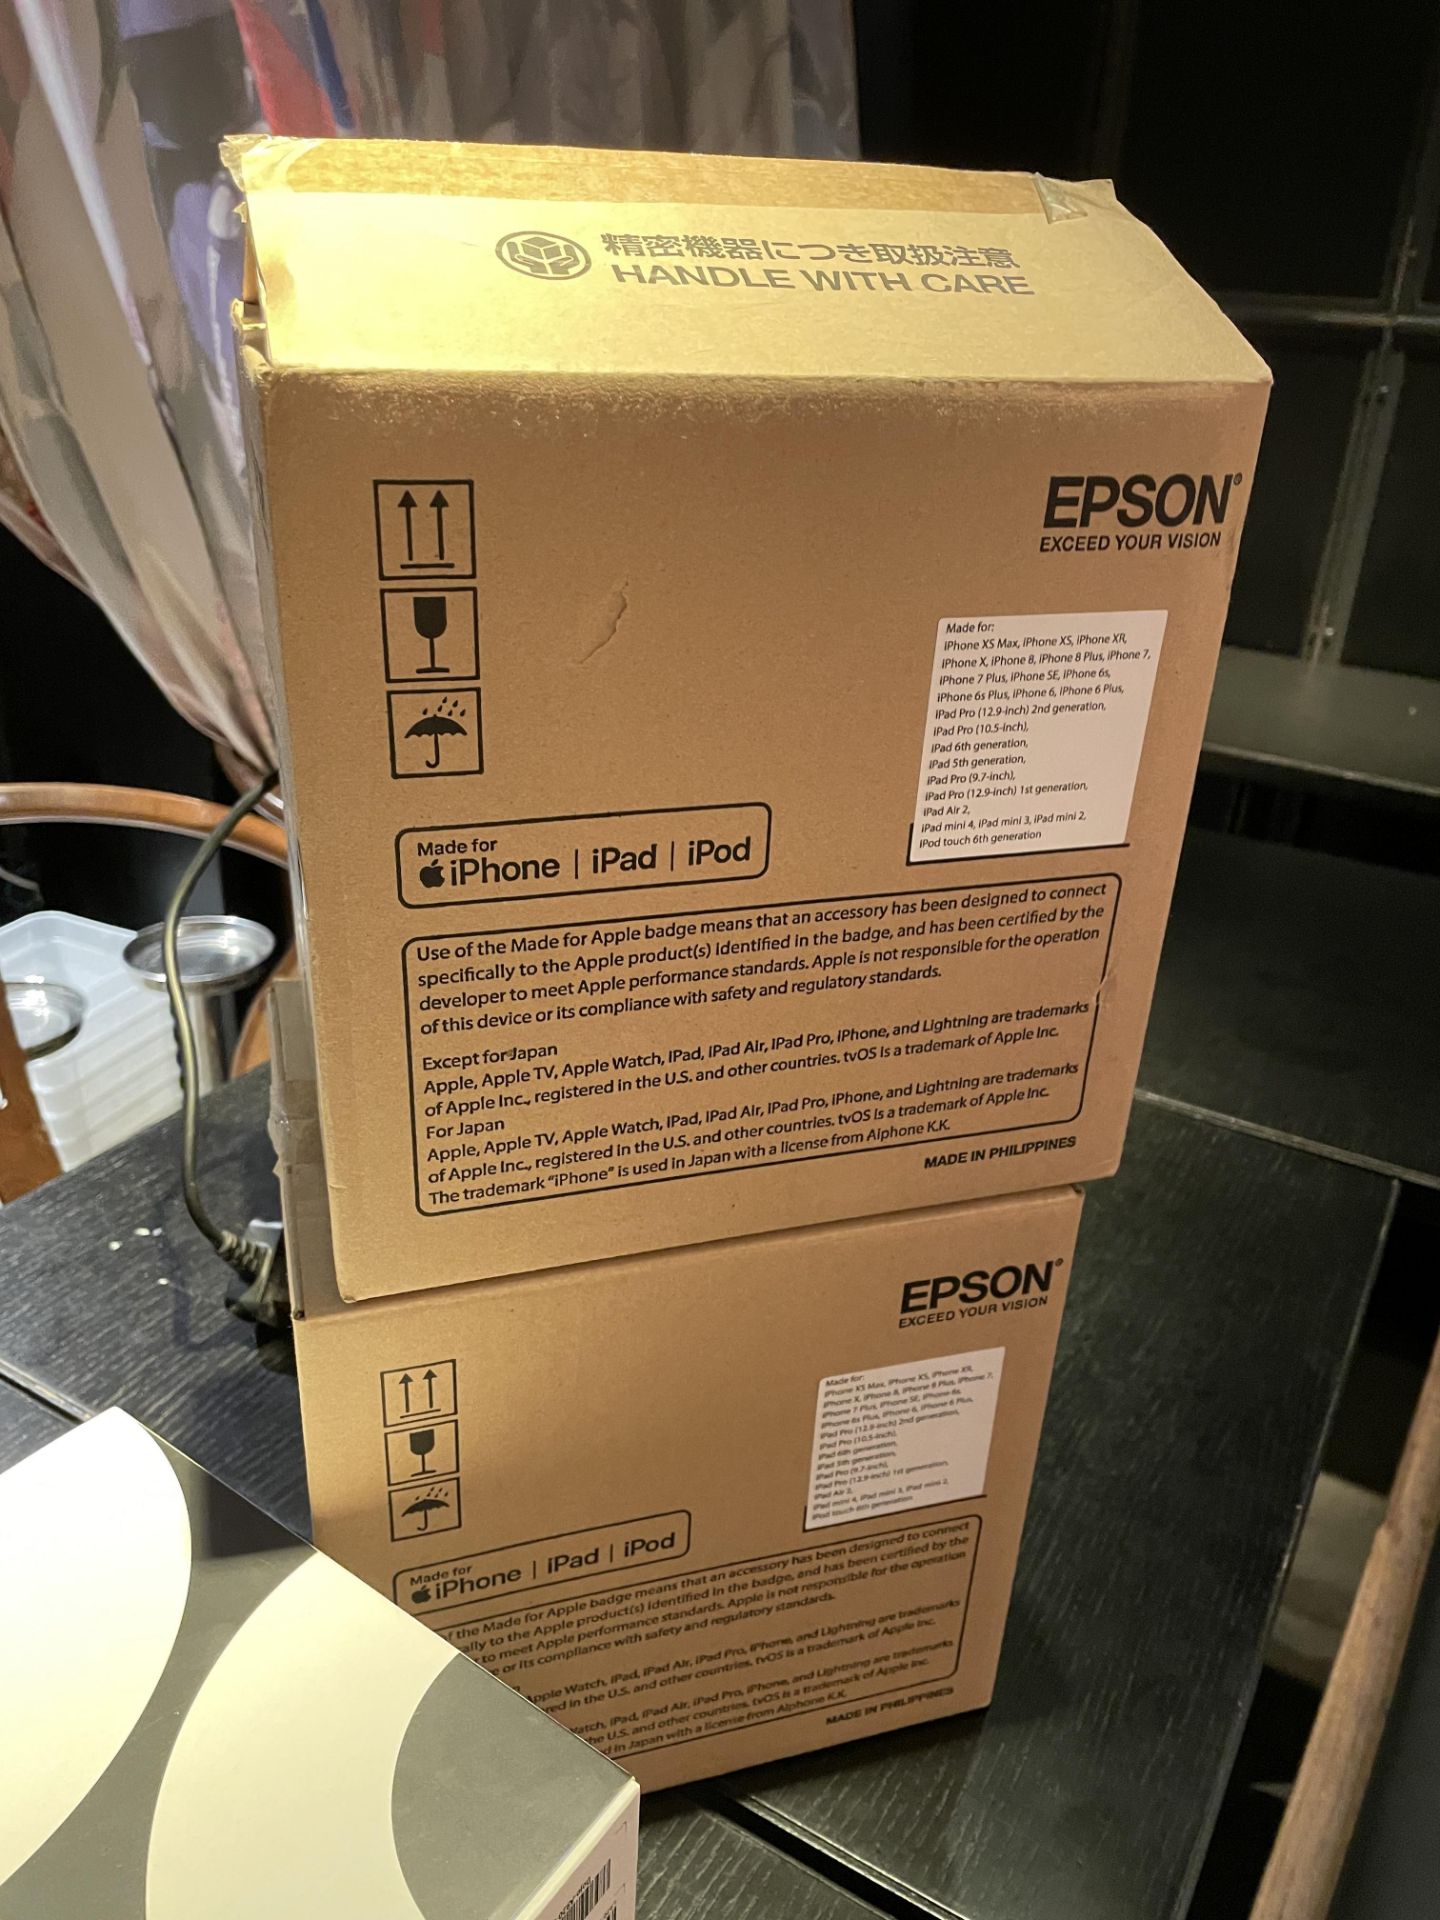 3 x Epson TM-M30II Thermal POS Printers For Apple Devices and 2 x DoJo Go A920 Payment Terminals - Image 9 of 11